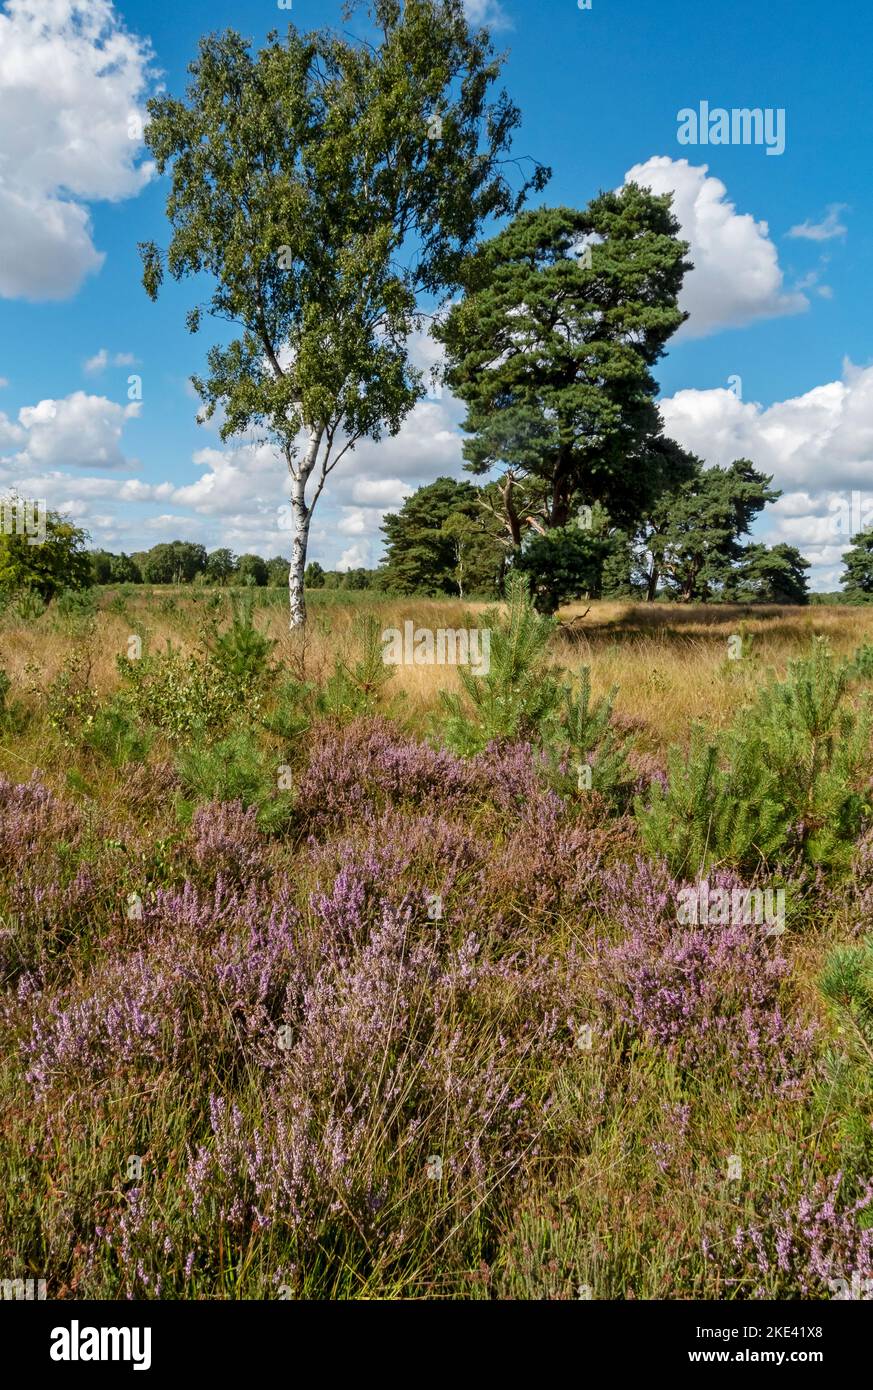 Silver birch tree trees and purple heather on Strensall Common nature reserve heathland in summer near York North Yorkshire England UK Great Britain Stock Photo